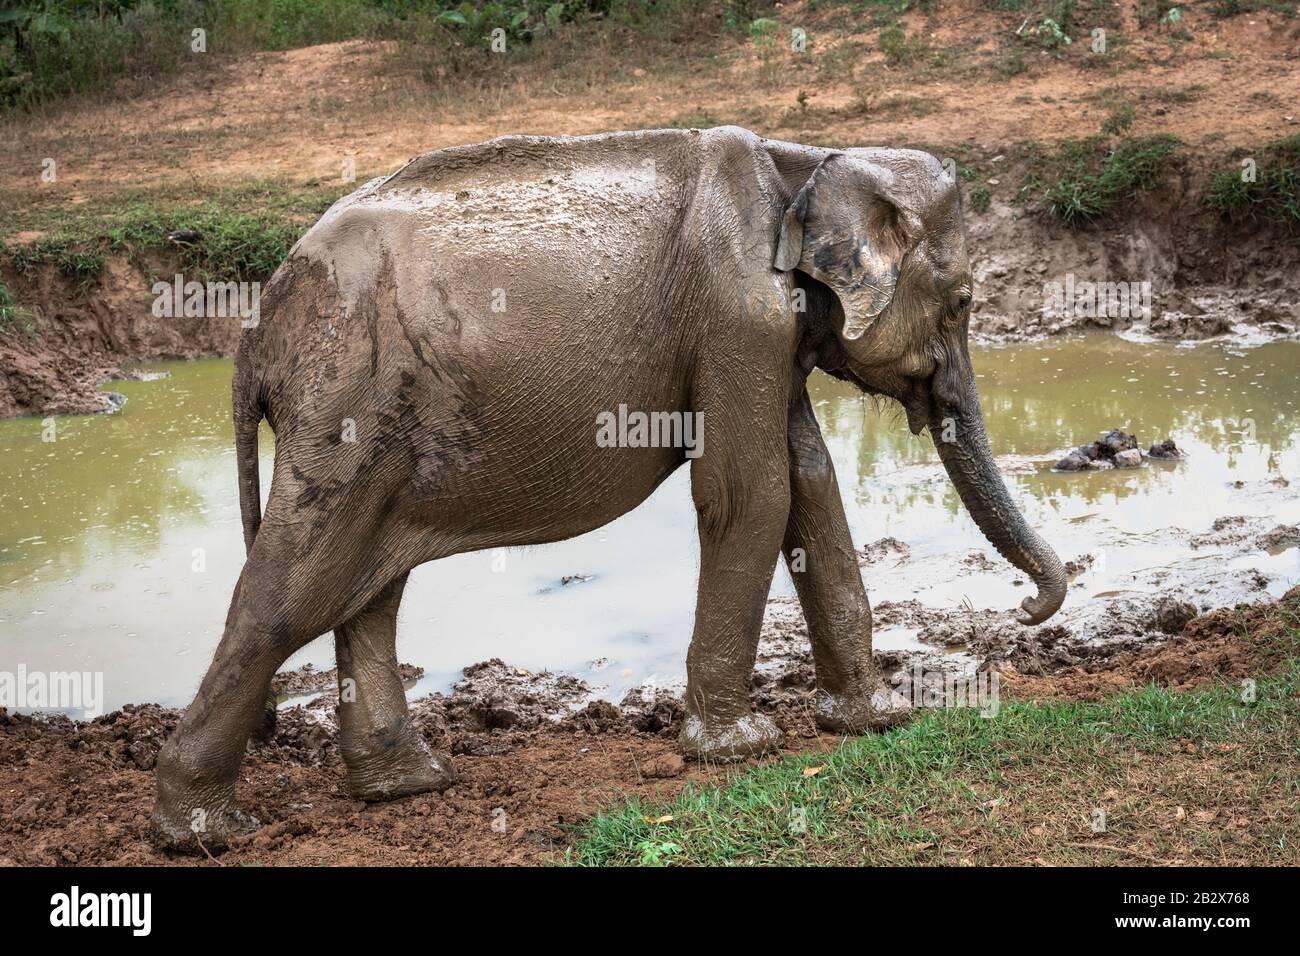 Deep inside Udawalawe National Park in the Southern Province of Sri Lanka, a playful baby Elephant leaves a watering hole covered in mud. Stock Photo